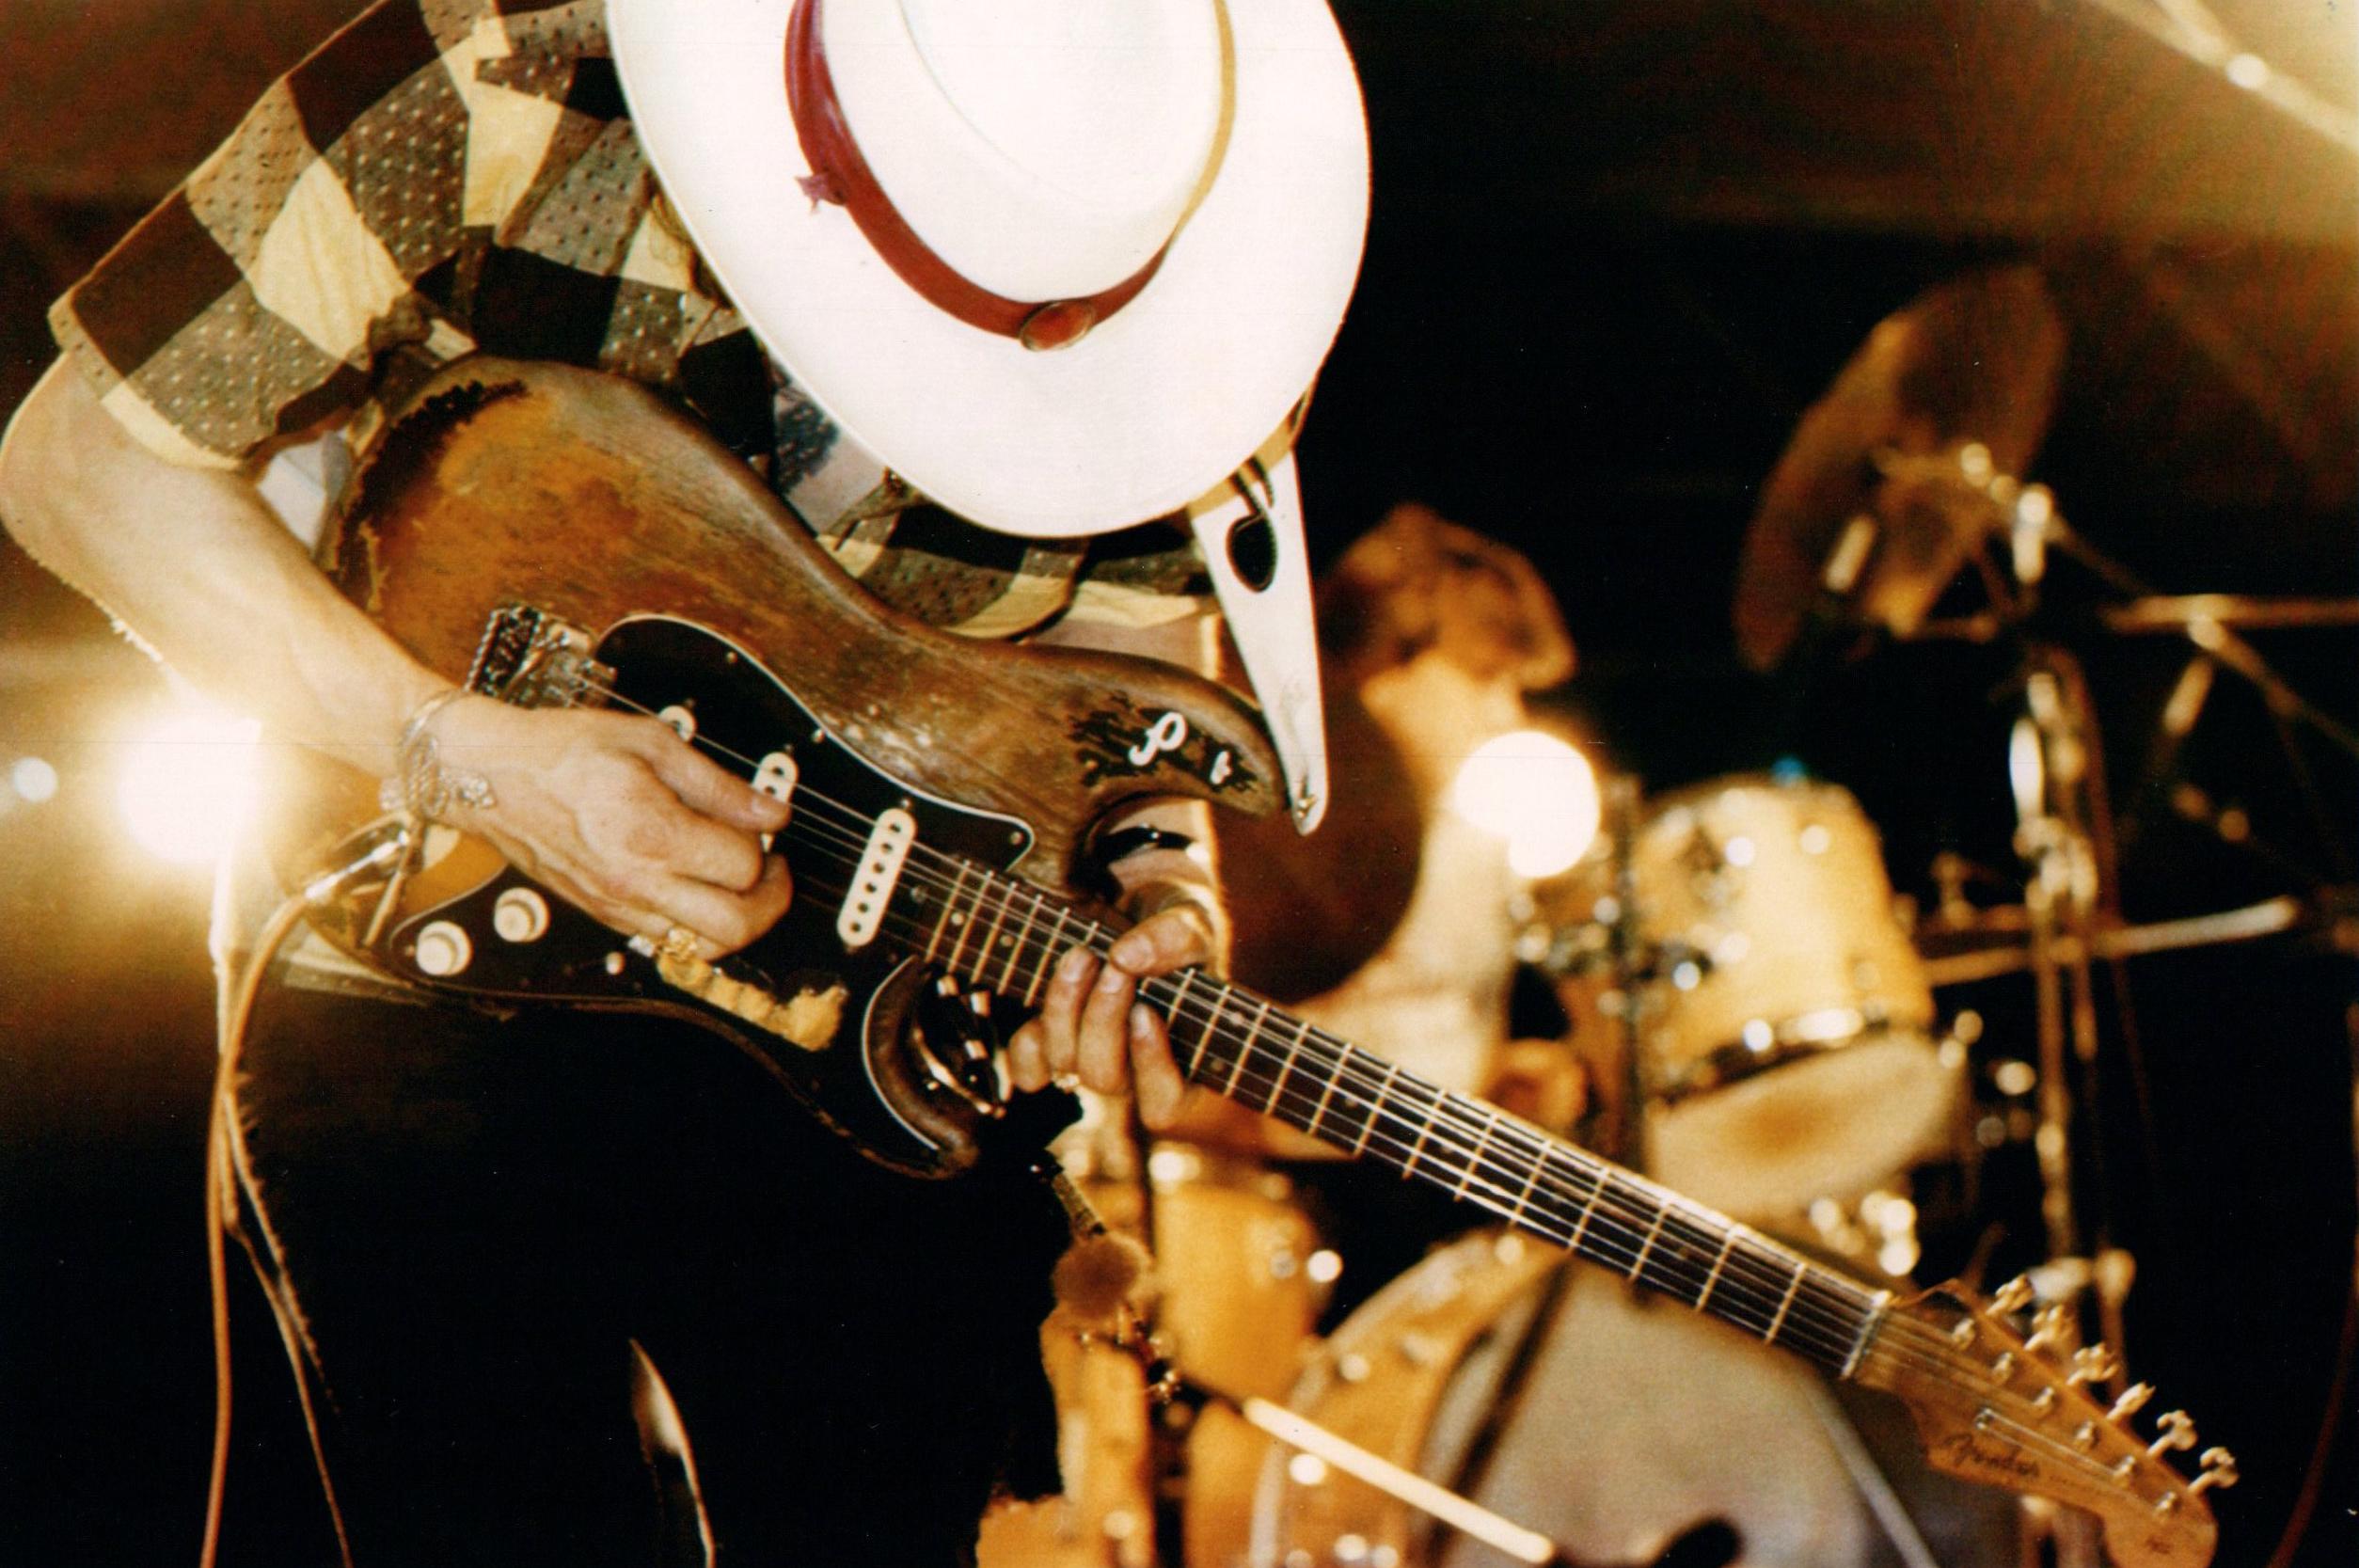 Luciano Viti Portrait Photograph - Stevie Ray Vaughan in Action Vintage Original Photograph